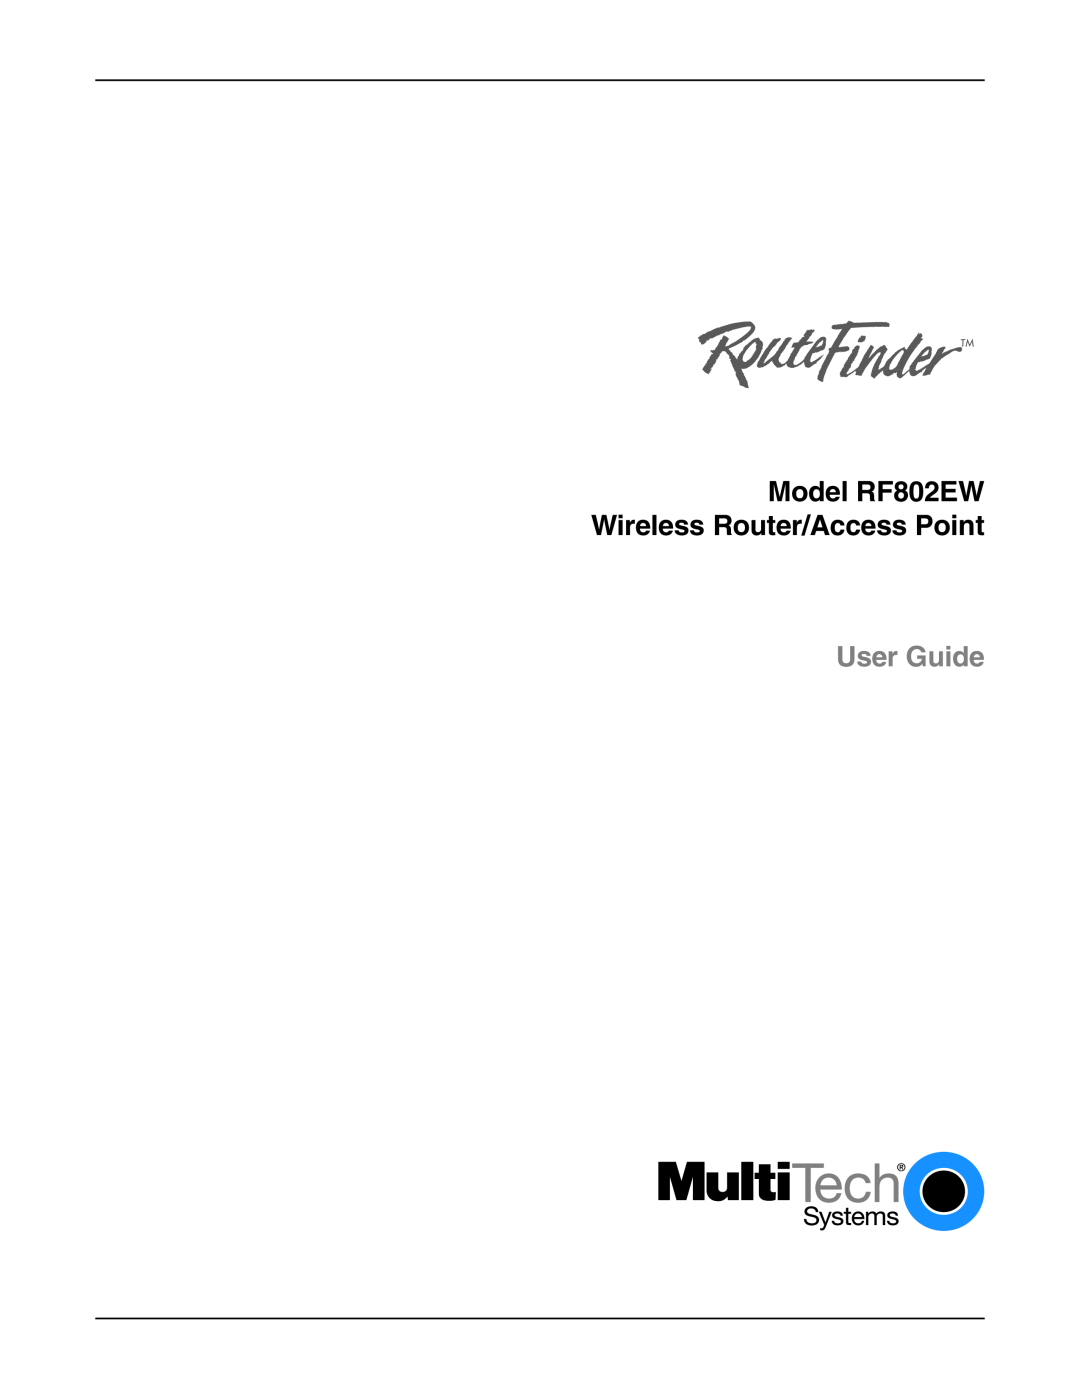 Multi-Tech Systems manual Model RF802EW Wireless Router/Access Point, User Guide 